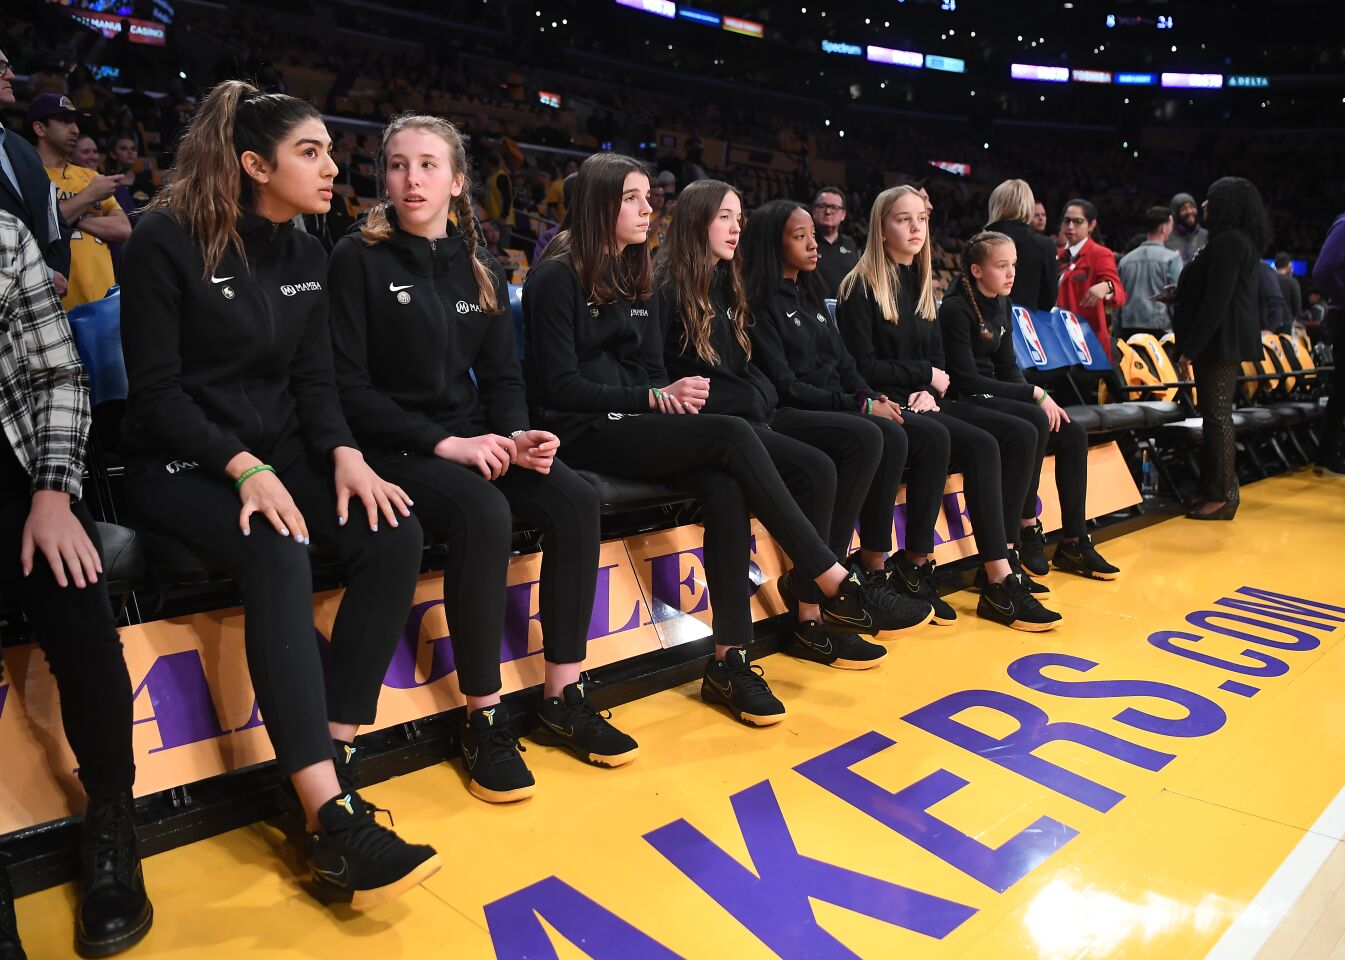 Members of the Black Mambas girls basketball team sit courtside before a pregame ceremony at Staples Center honoring their teammate Gianna Bryant and their coach Kobe Bryant on Jan. 31, 2020.